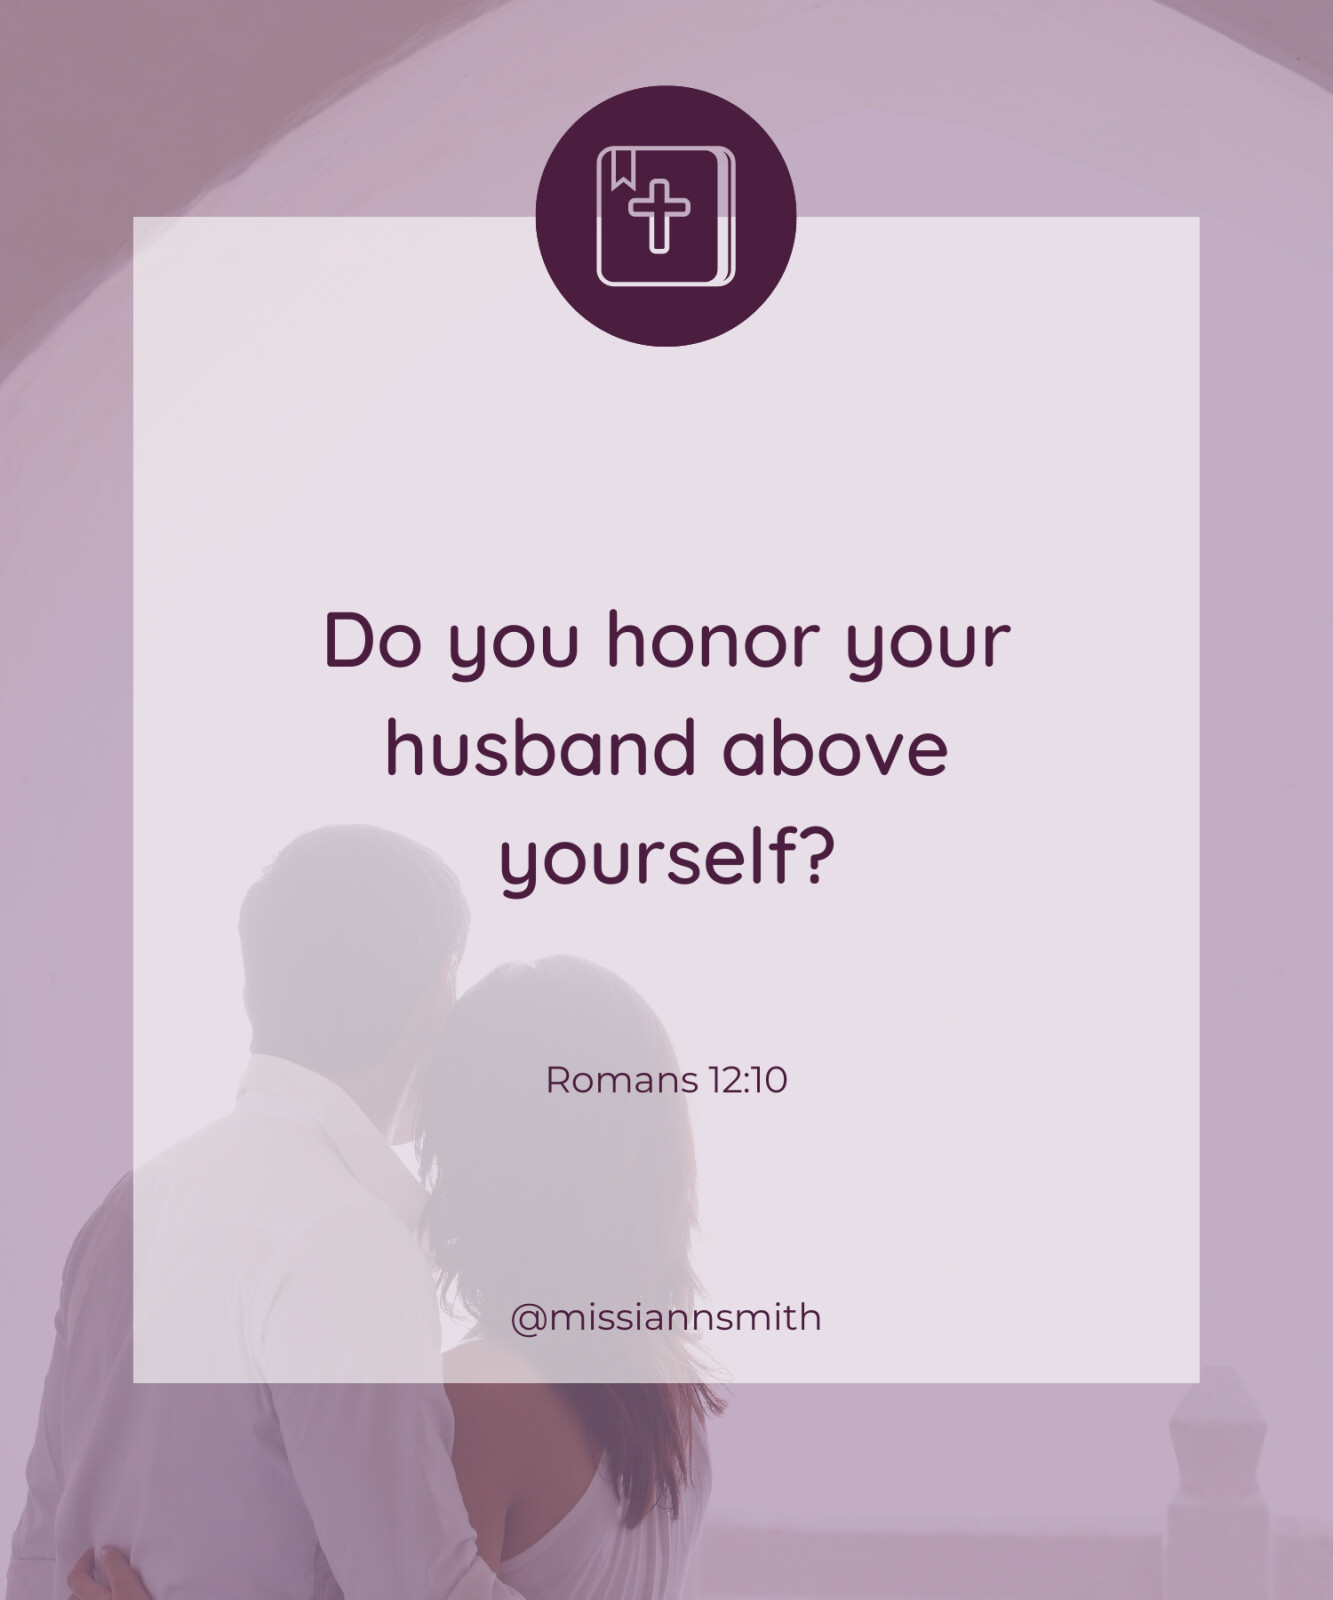 Do you honor your husband above yourself?